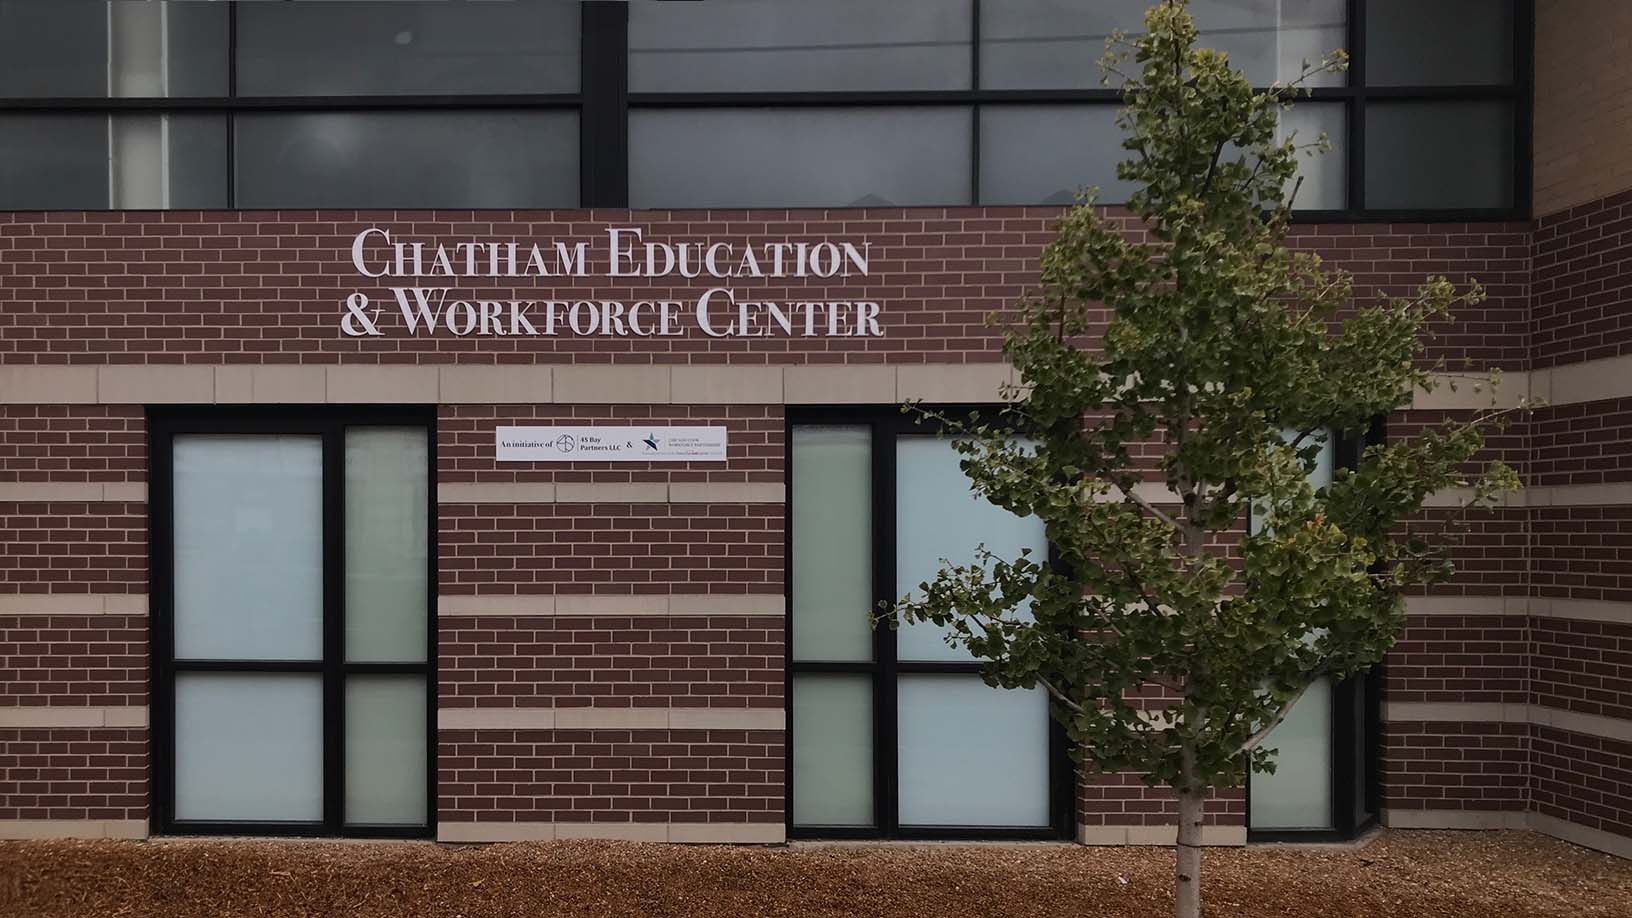 Chatham Education & Workforce Center signage installed on the red brick exterior of the building.